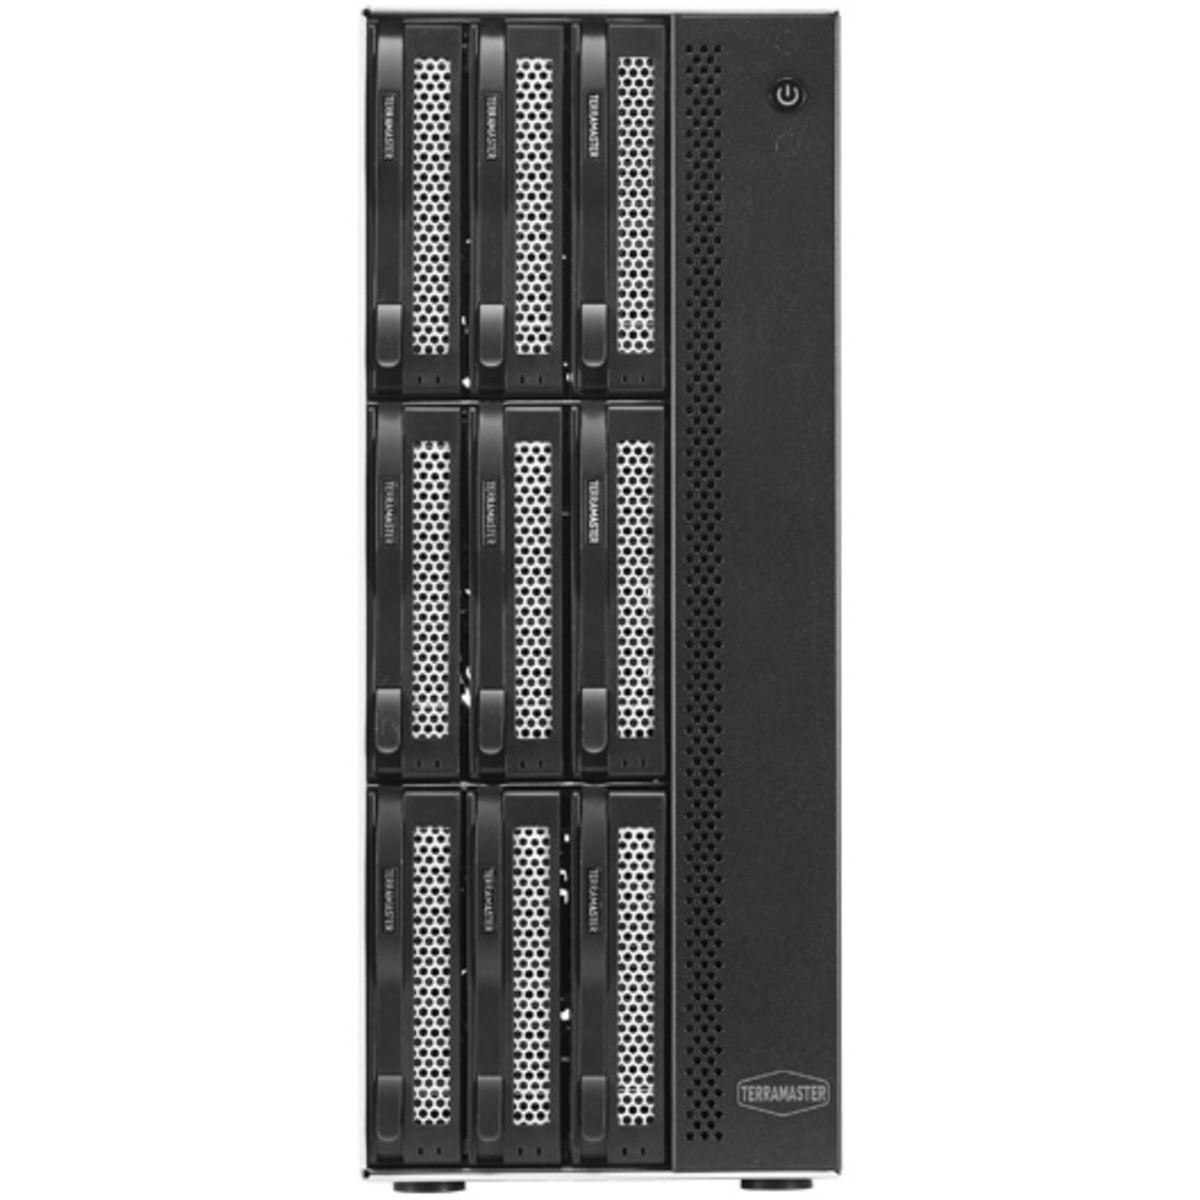 buy $5178 TerraMaster T9-450 180tb Desktop NAS - Network Attached Storage Device 9x20000gb Western Digital Red Pro WD201KFGX 3.5 7200rpm SATA 6Gb/s HDD NAS Class Drives Installed - Burn-In Tested - nas headquarters buy network attached storage server device das new raid-5 free shipping usa T9-450